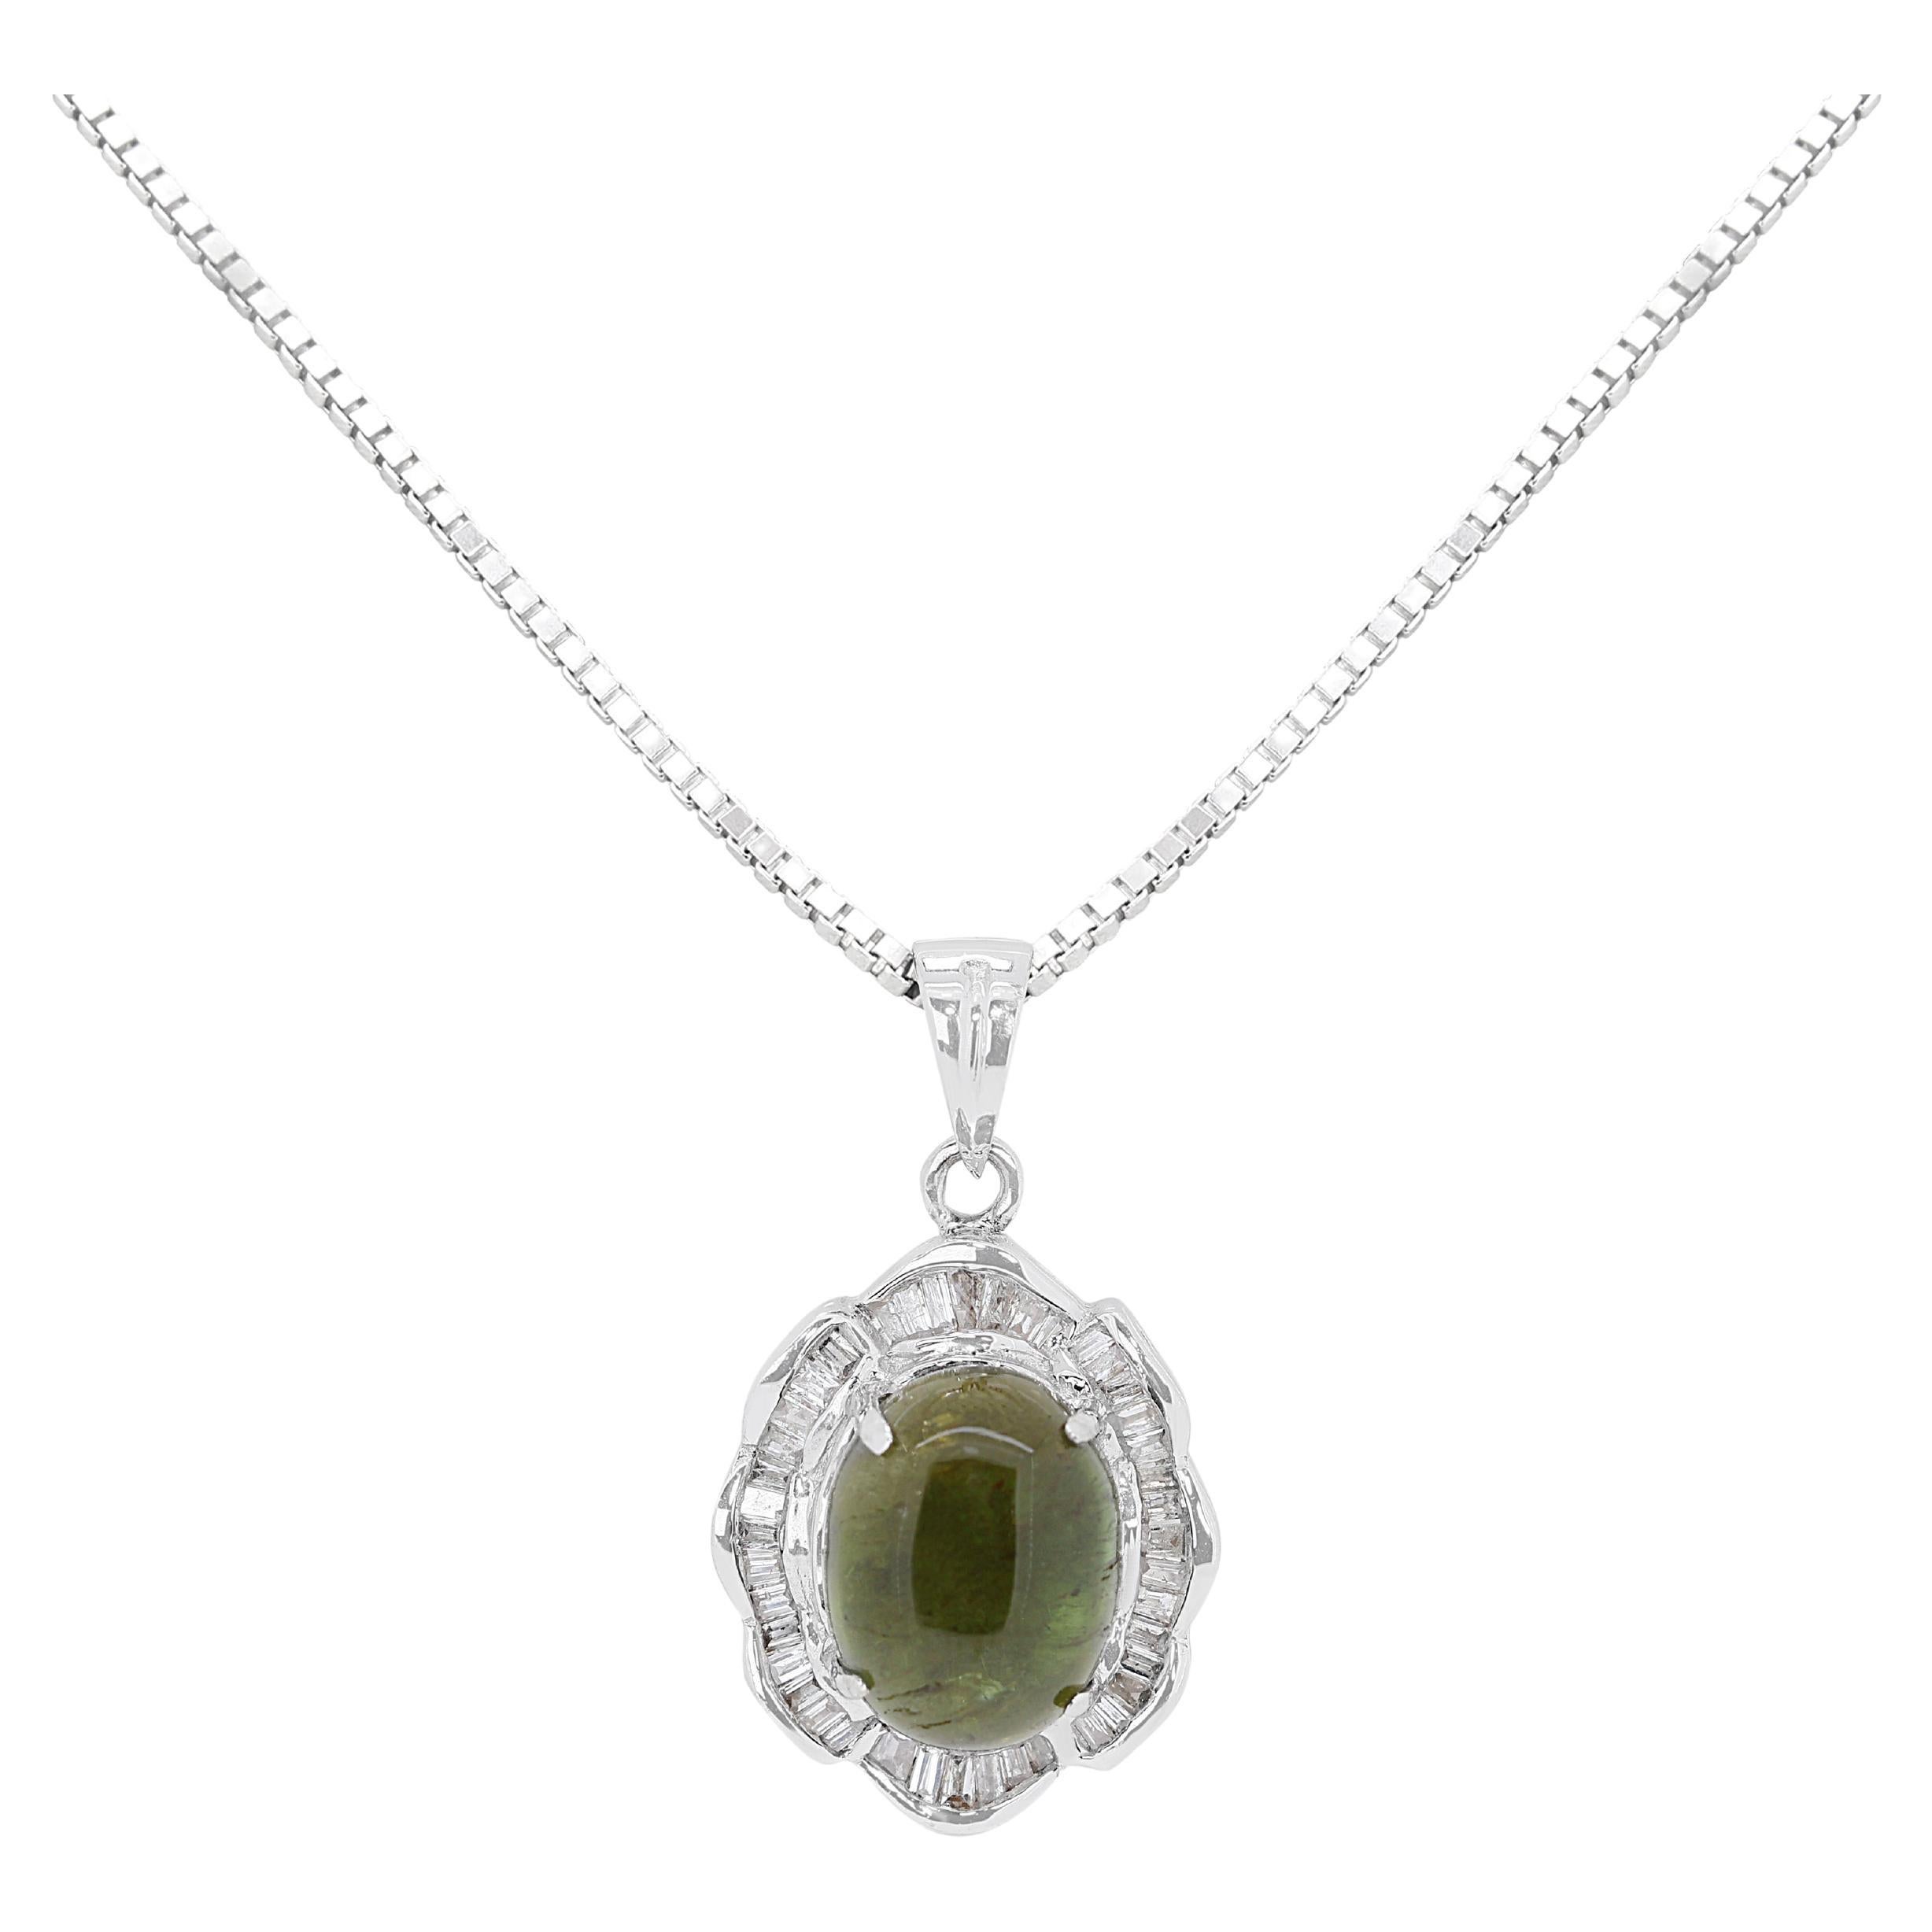 Fascinating 2.83ct Tourmaline Pendant w/ Diamonds - (Chain not Included)